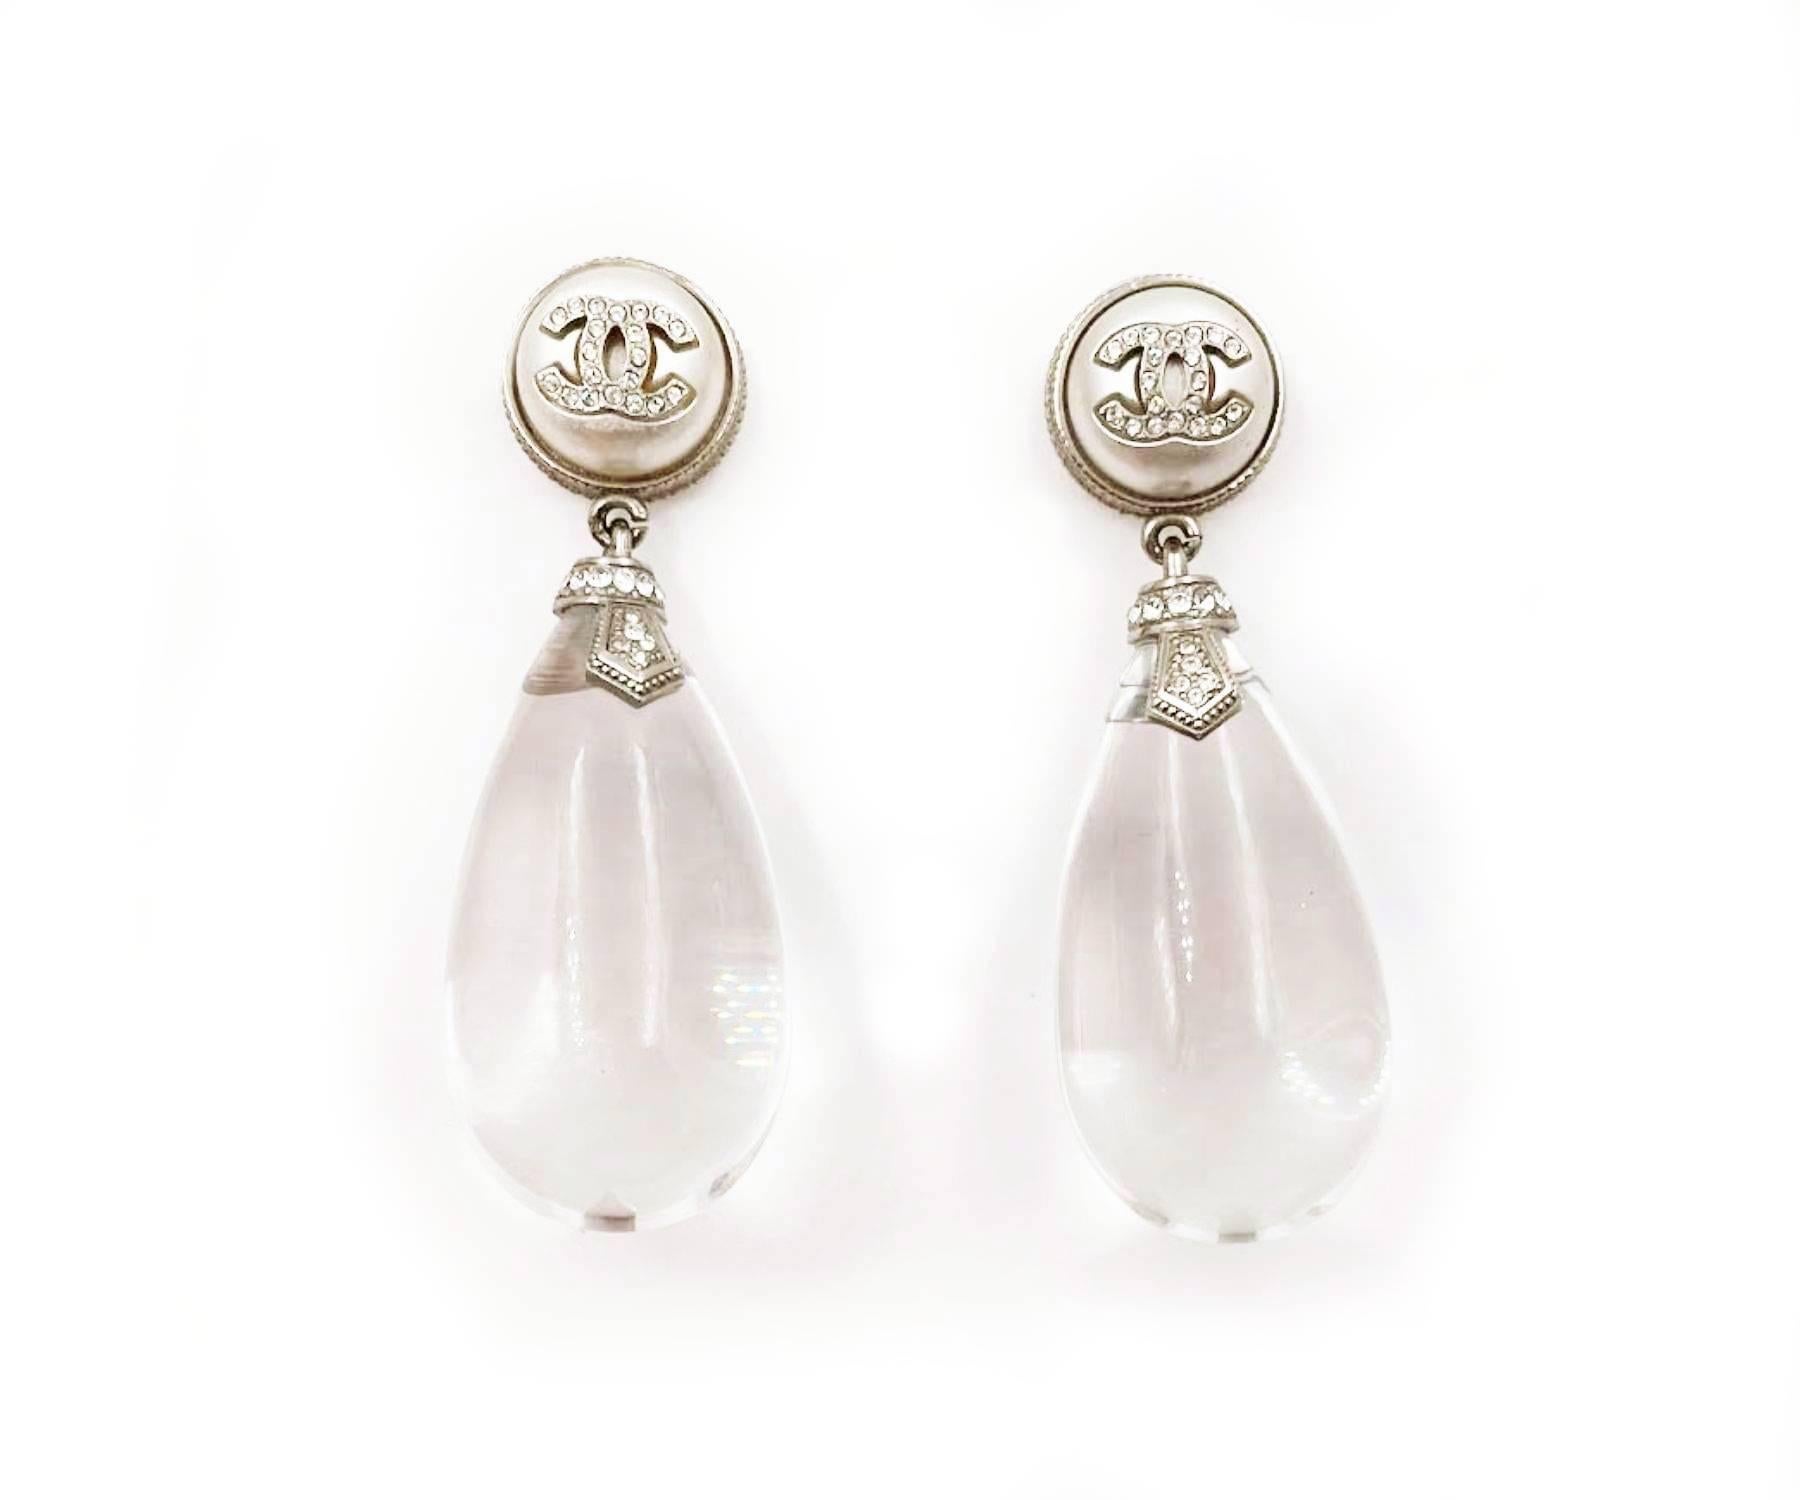 Chanel Silver CC Crystal Round Pearl Water Drop XL Clip on Earrings

* Marked 18
* Made in France
* Comes with the the original box and pouch

- It is approximately 2.5